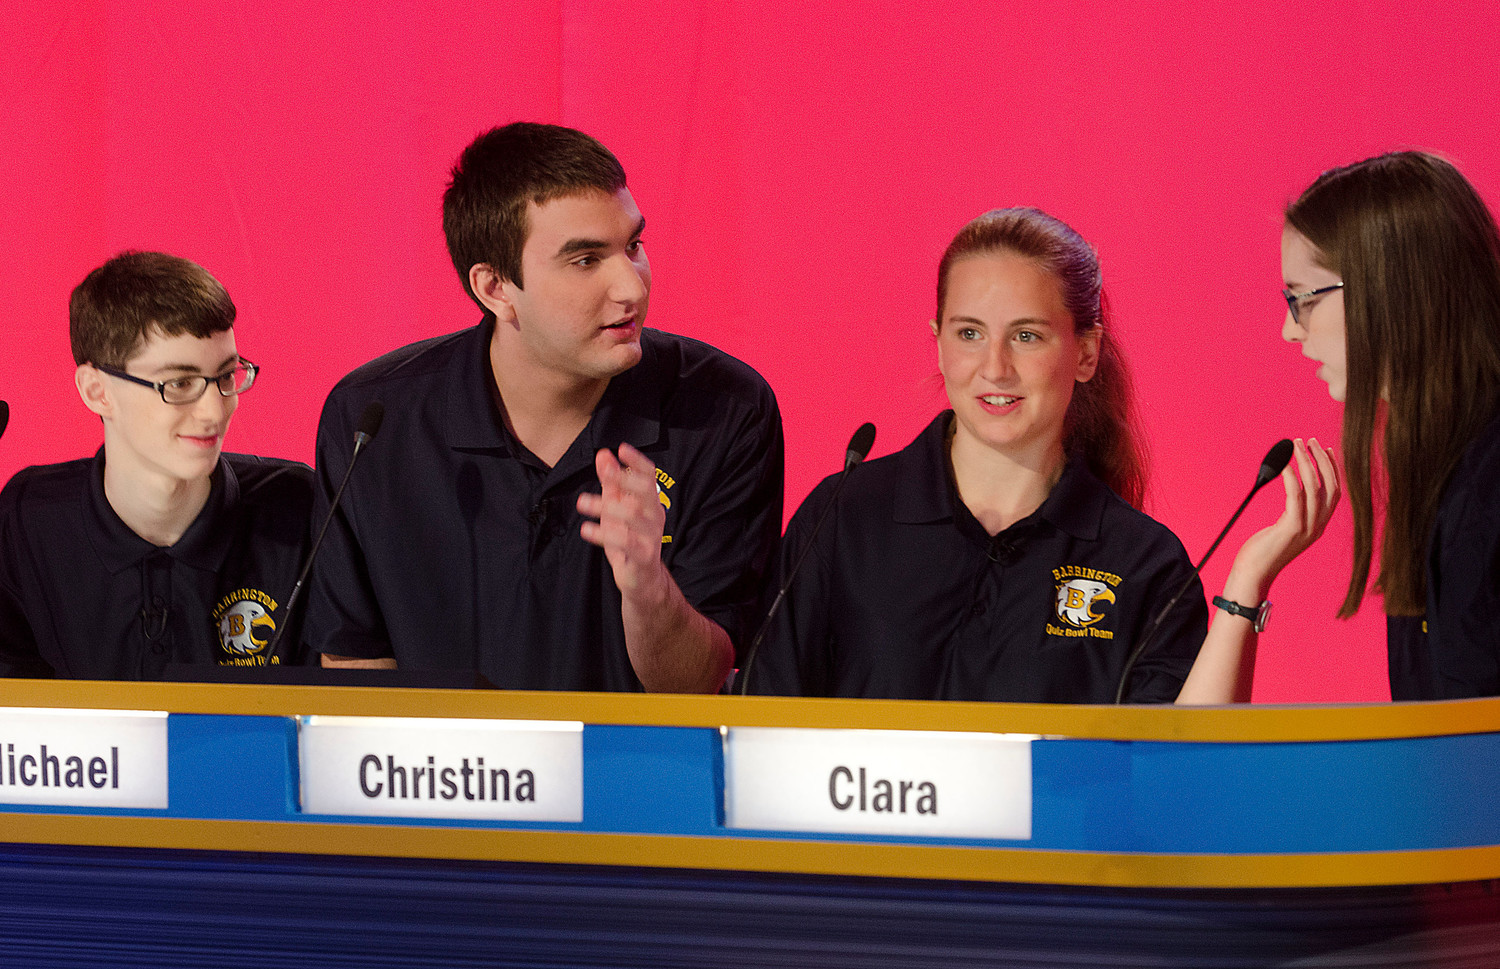 Members of the Barrington High School team (from left to right) Daniel Sheinberg, Michael Lamontagne, Christina Curran and Clara Klugler confer before offering an answer during the High School Quiz Show: Rhode Island competition at the PBS studios on Saturday morning.